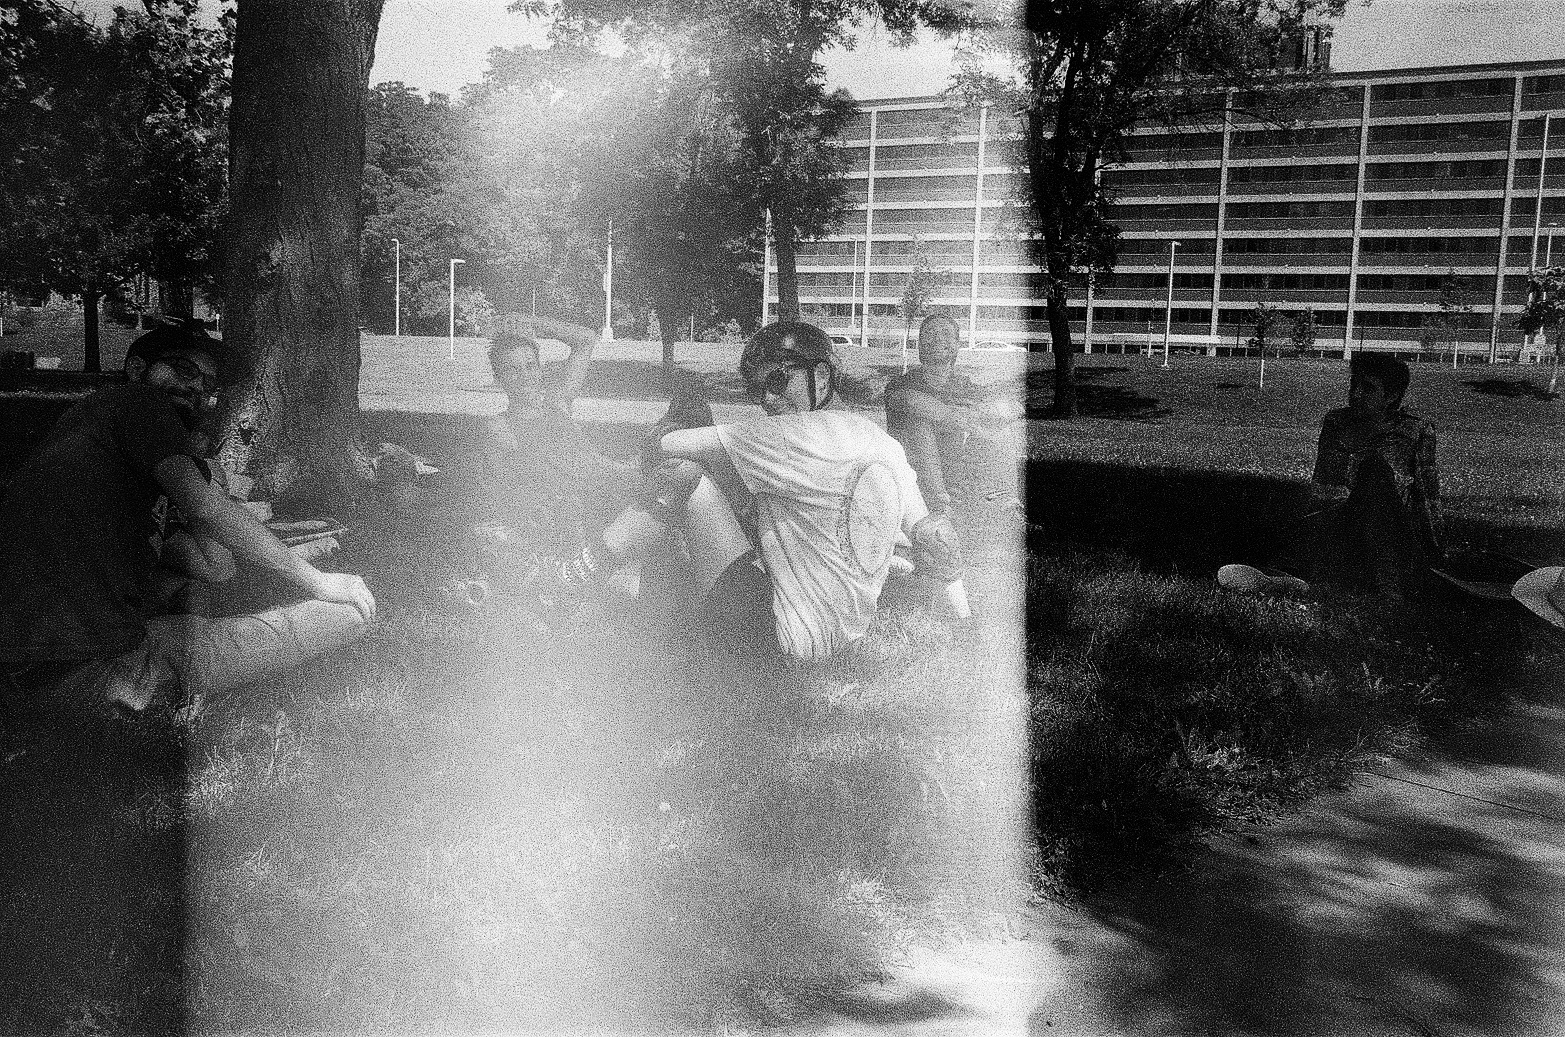 People sitting on grass.